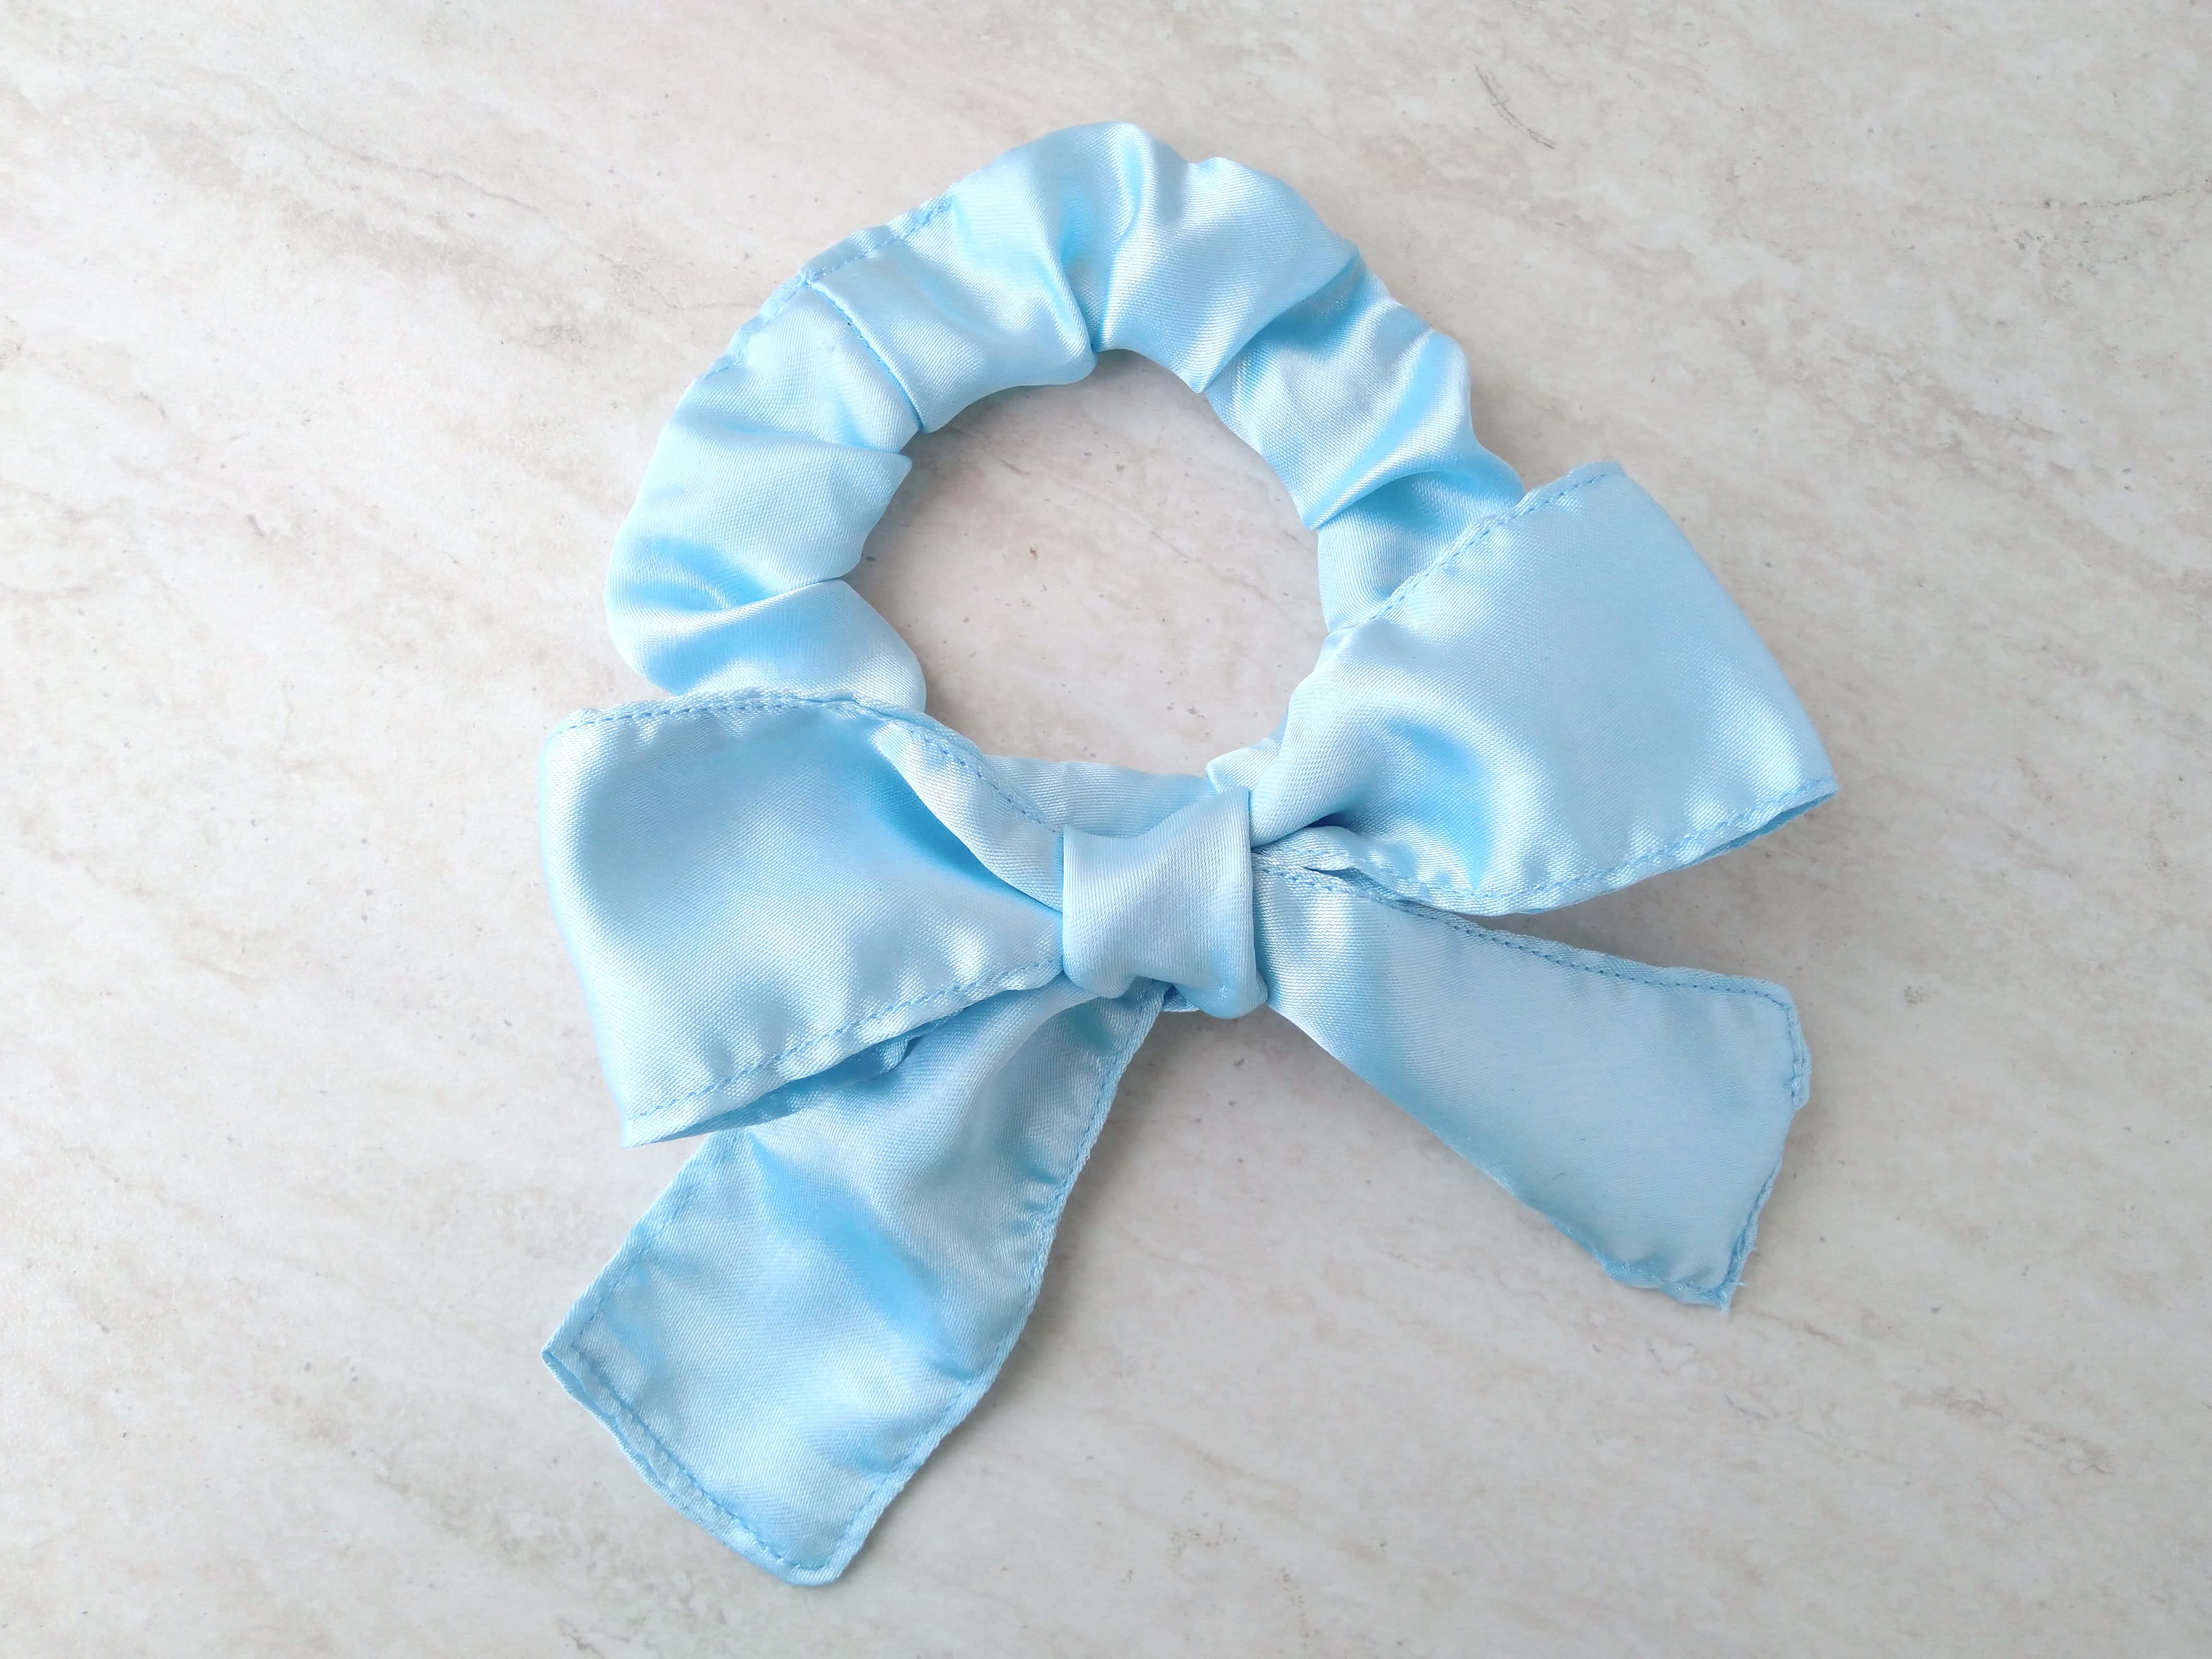 how to make scrunchies